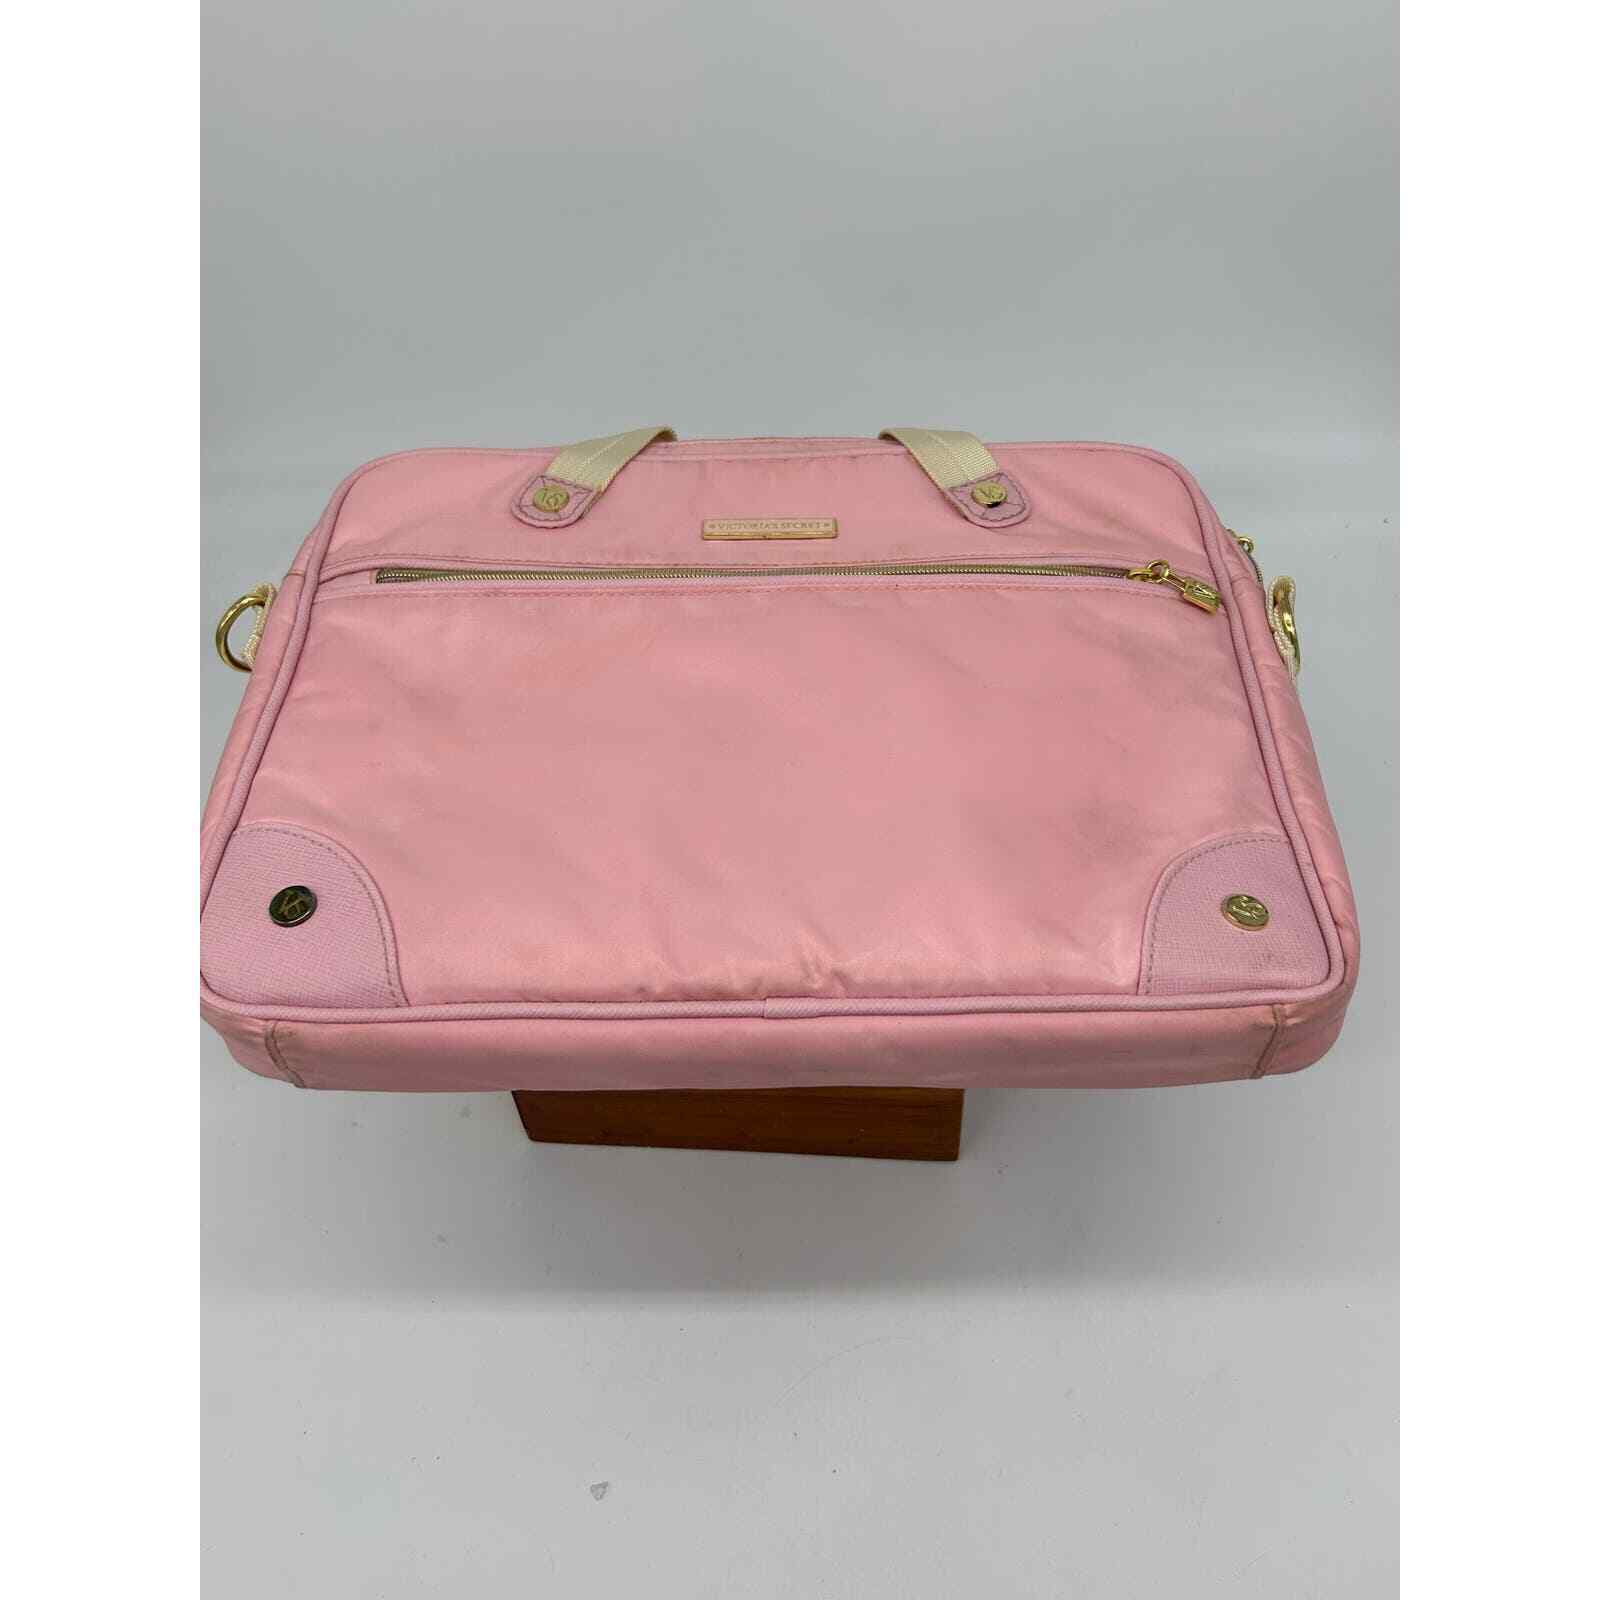 Victoria\'s Secret Laptop Sleeve Bag Pink with Gold Accents 10\